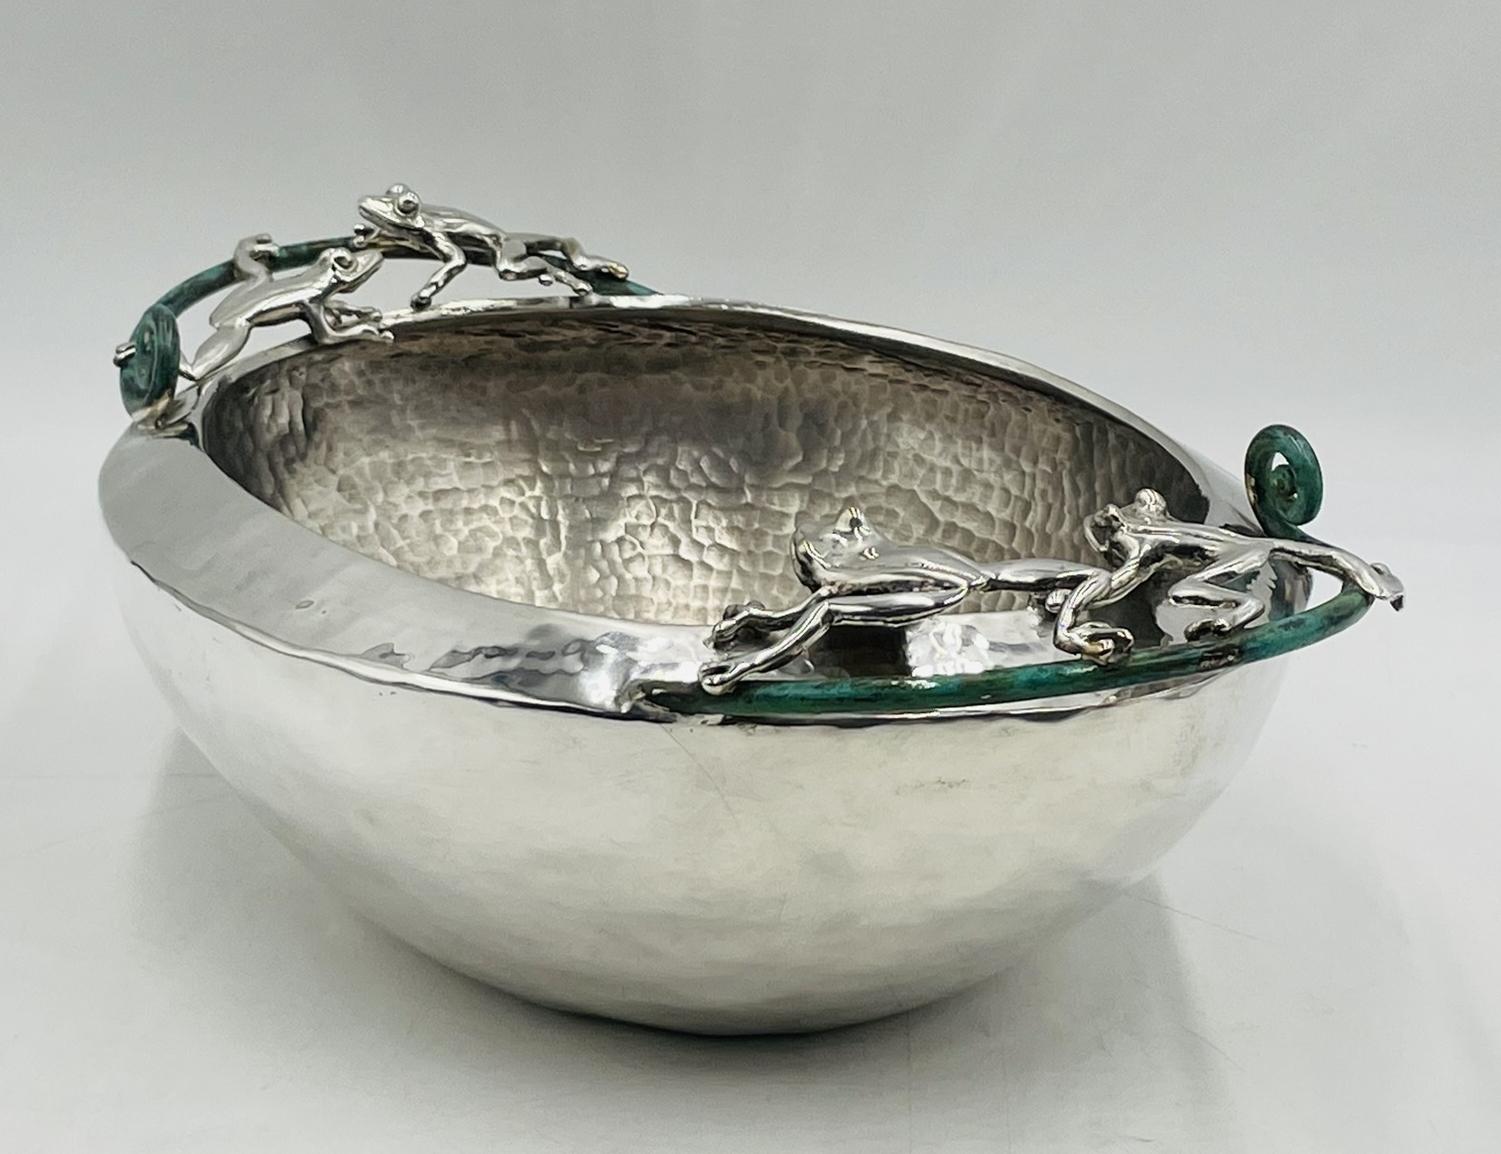 Large Silver-Plated Bowl With Frogs Handles by Emilia Castillo, Mexico 21st Cent In Good Condition For Sale In Los Angeles, CA